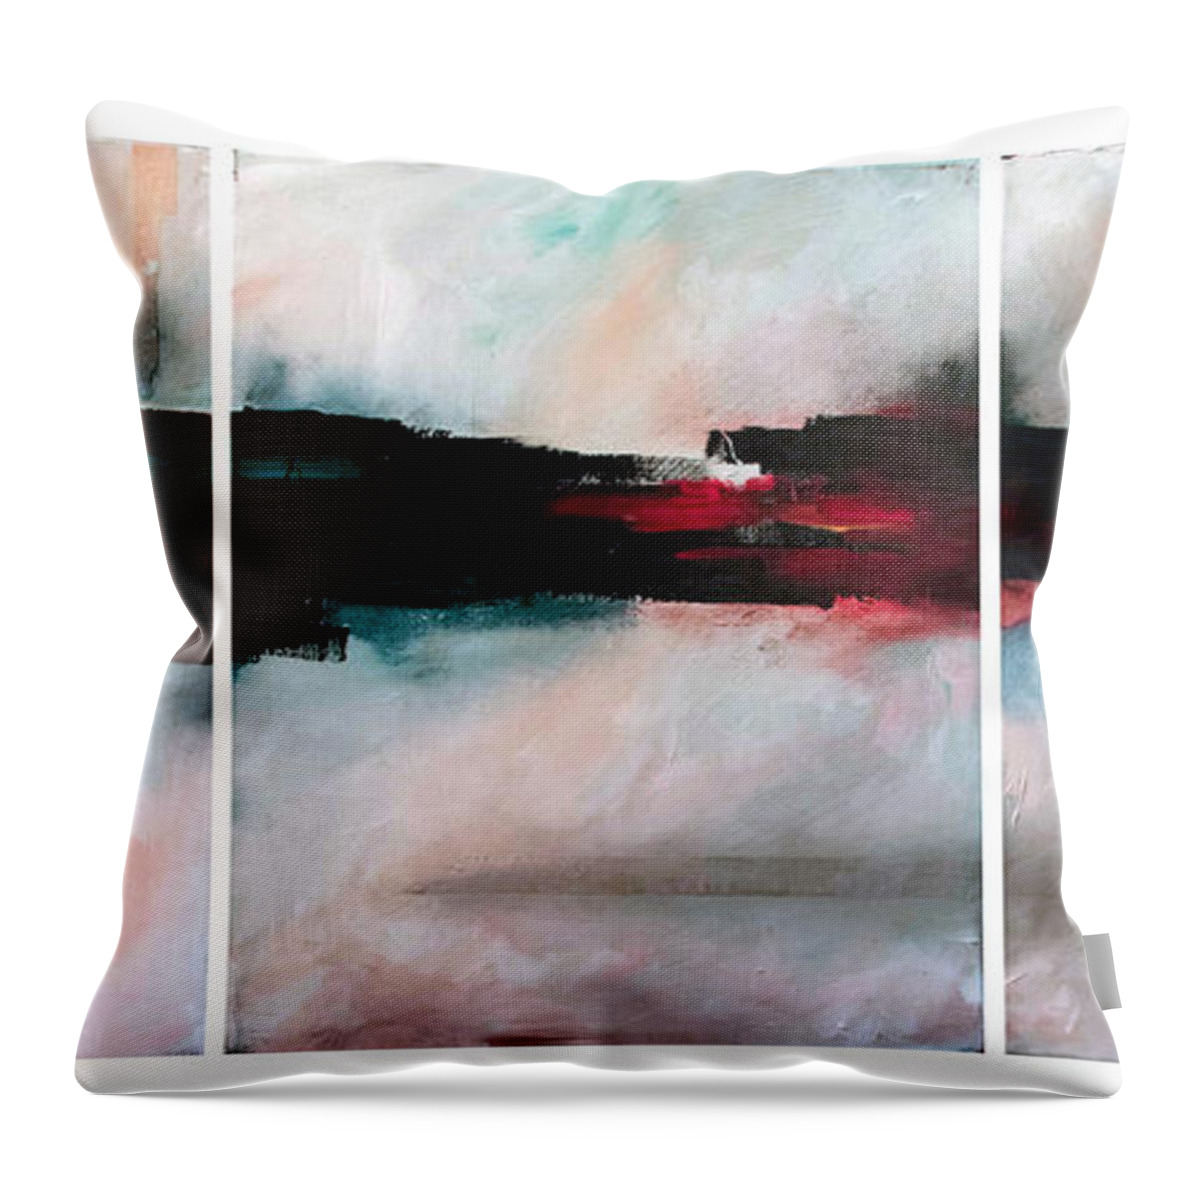 River Tethys Throw Pillow featuring the painting The River Tethys by Sean Parnell